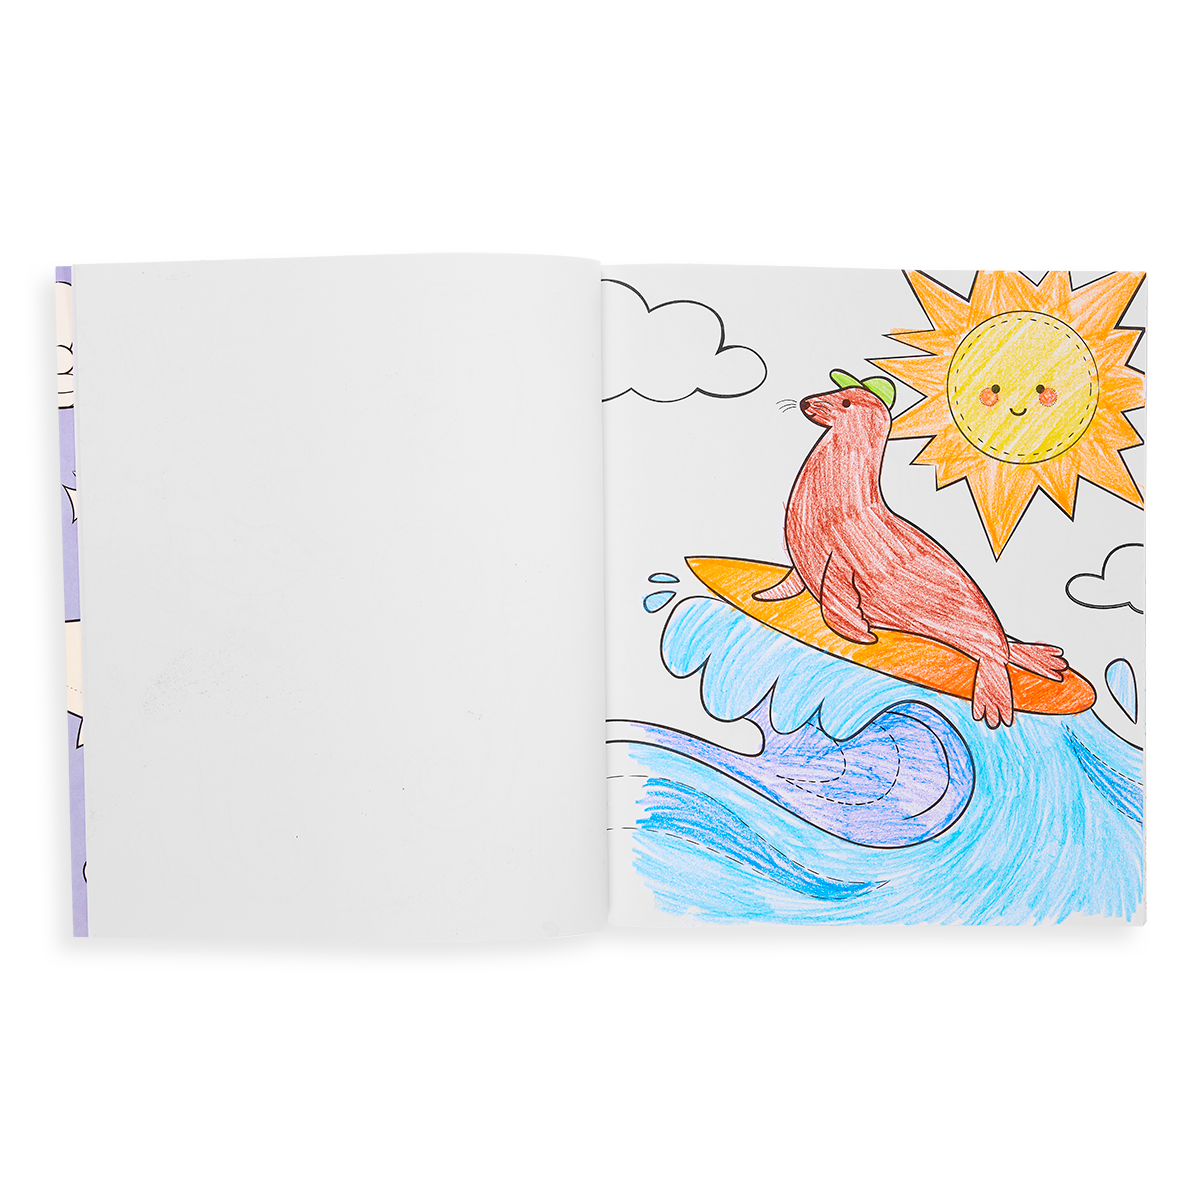 ABC Big Jumbo Coloring Book For Toddlers: A coloring book with animals and  letters for kids aged 2 to 6. Activity book for learning the alphabet  through drawing. by Warson Andrews